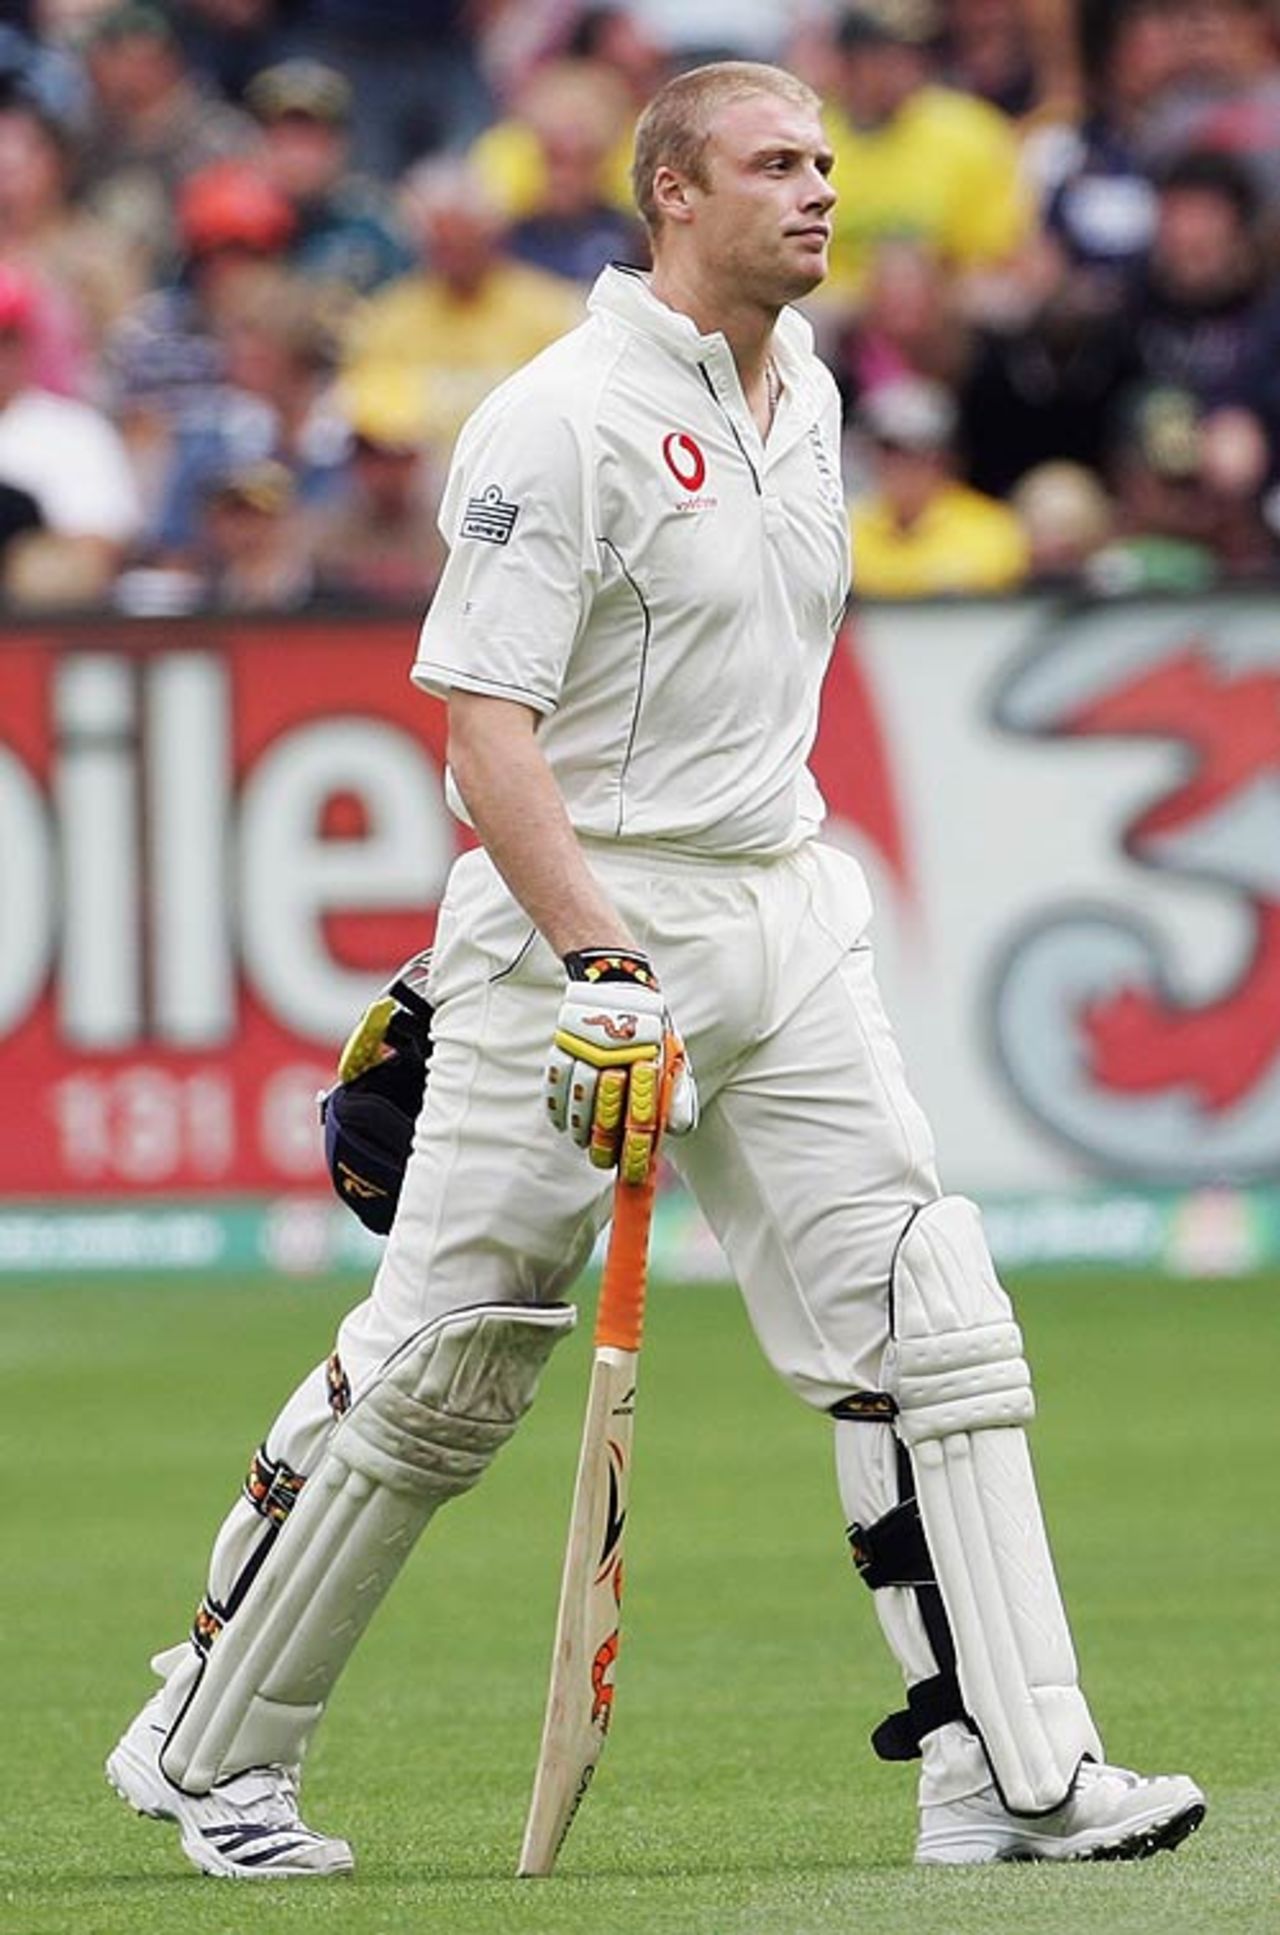 Andrew Flintoff walks off the MCG after being caught for 13, Australia v England, 4th Test, Melbourne, December 26, 2006